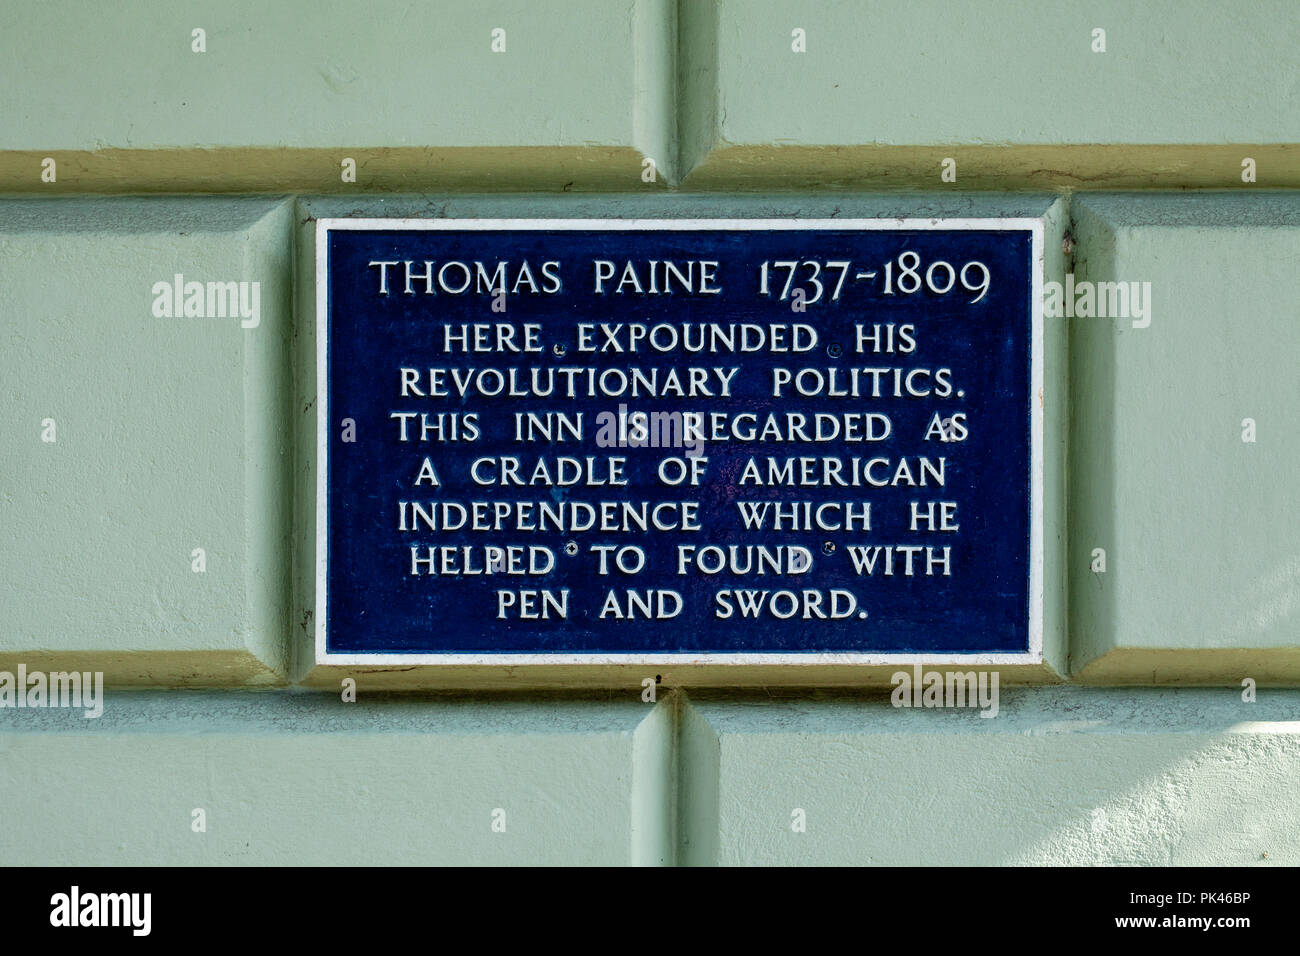 A Thomas Paine (American Revolutionary) Wall Plaque Outside The White Hart Hotel, High Street, Lewes, East Sussex, UK Stock Photo